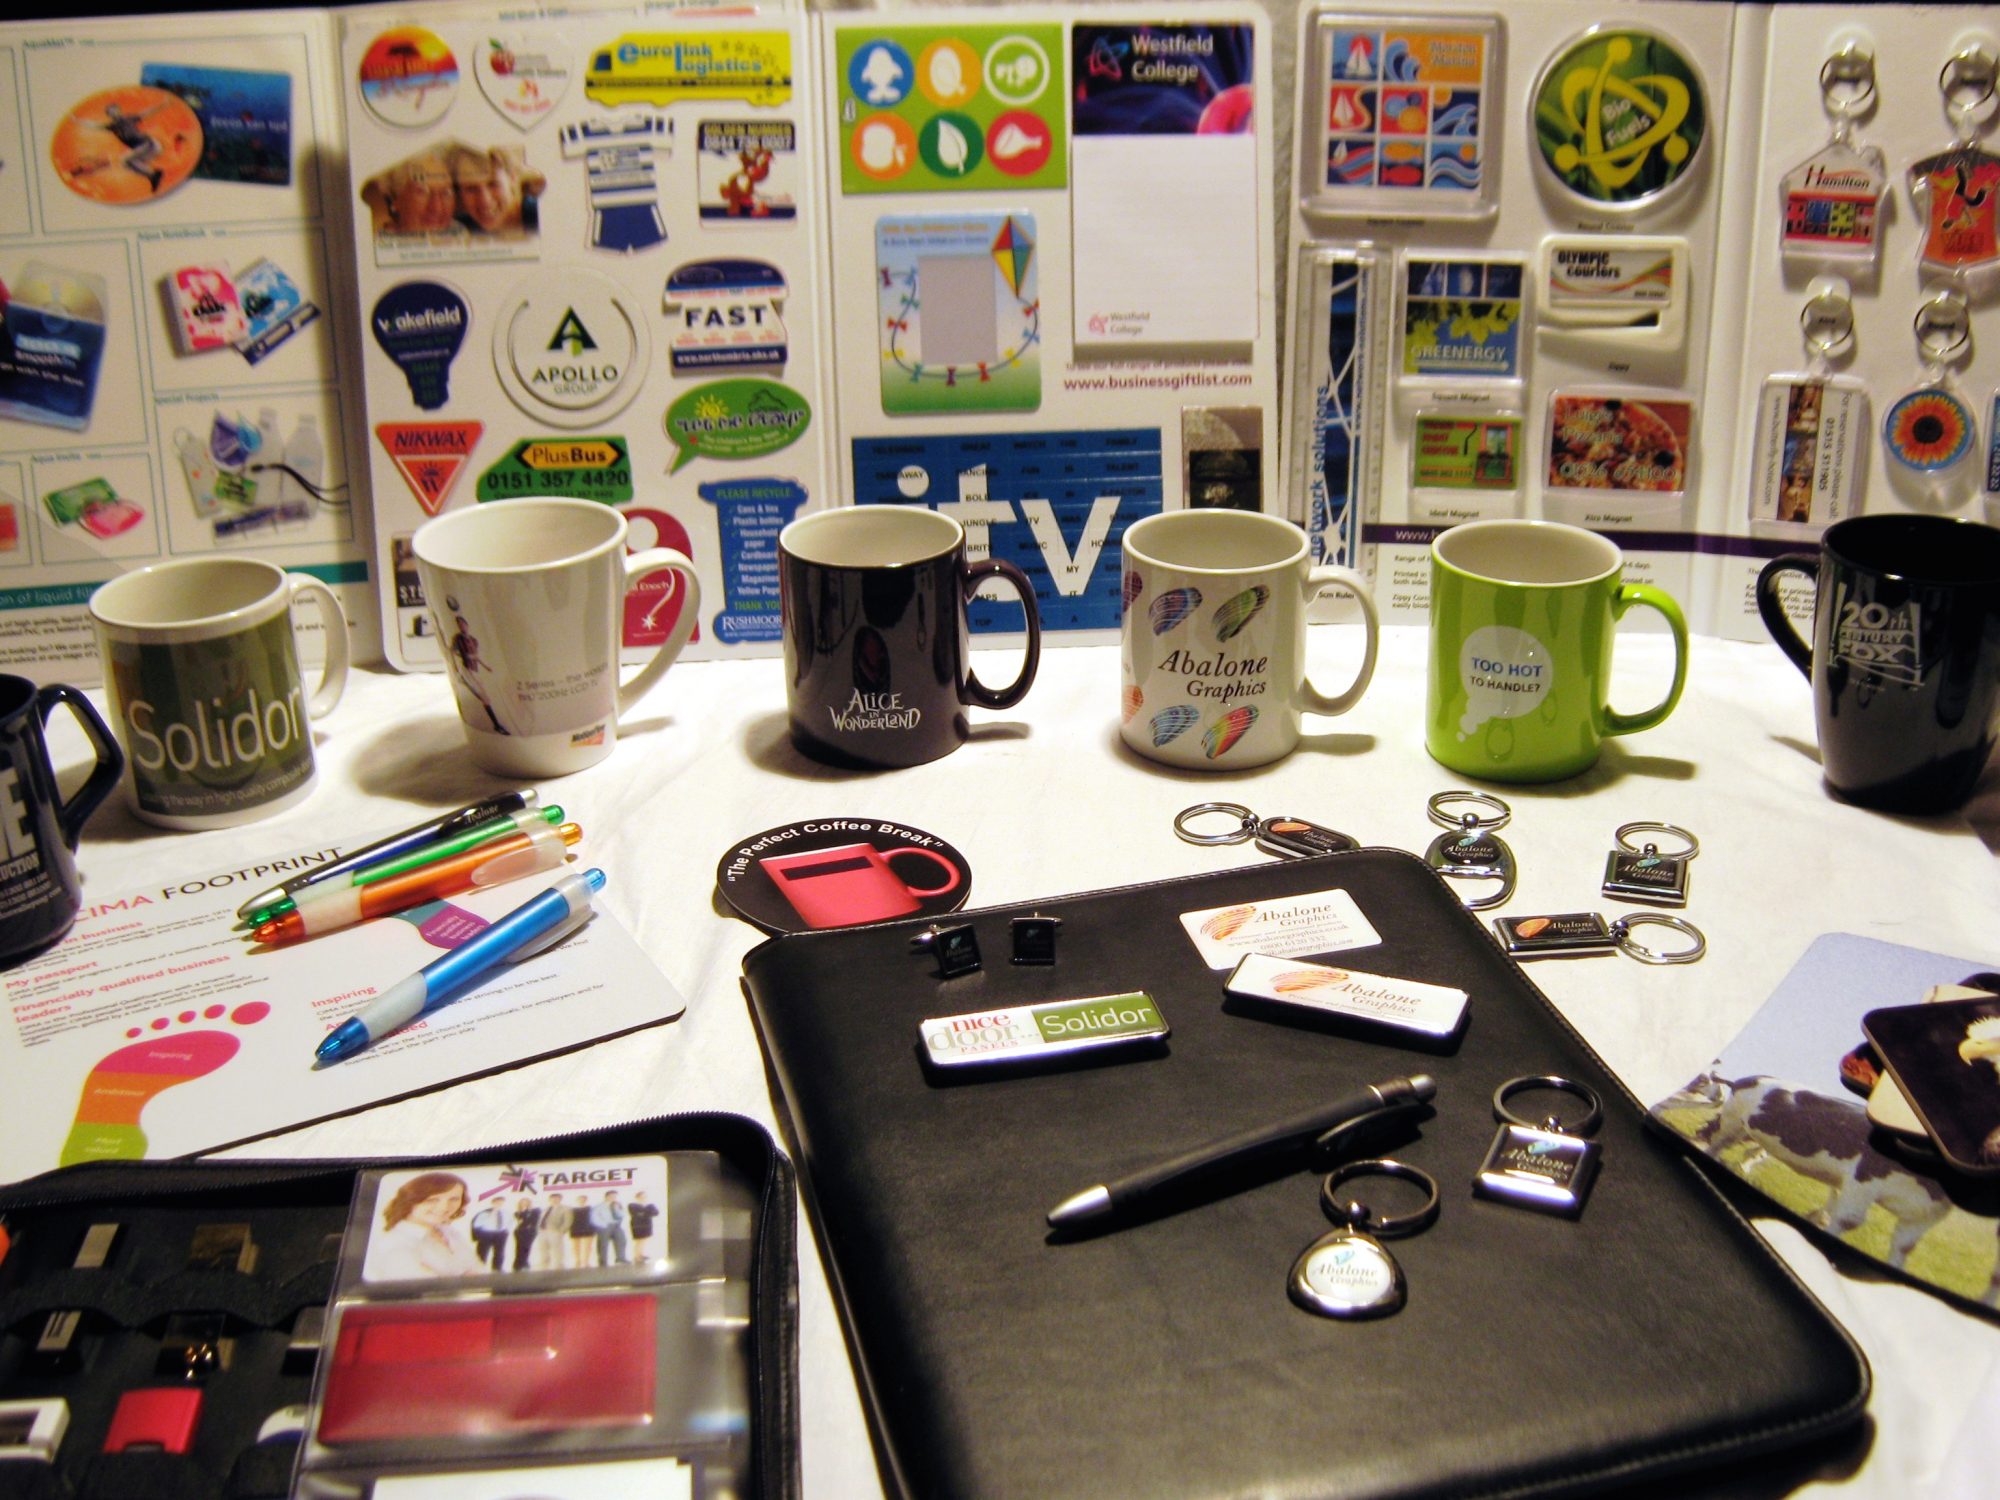 FINDING SOME OF THE BEST PROMOTIONAL PRODUCTS FOR YOUR BUSINESS